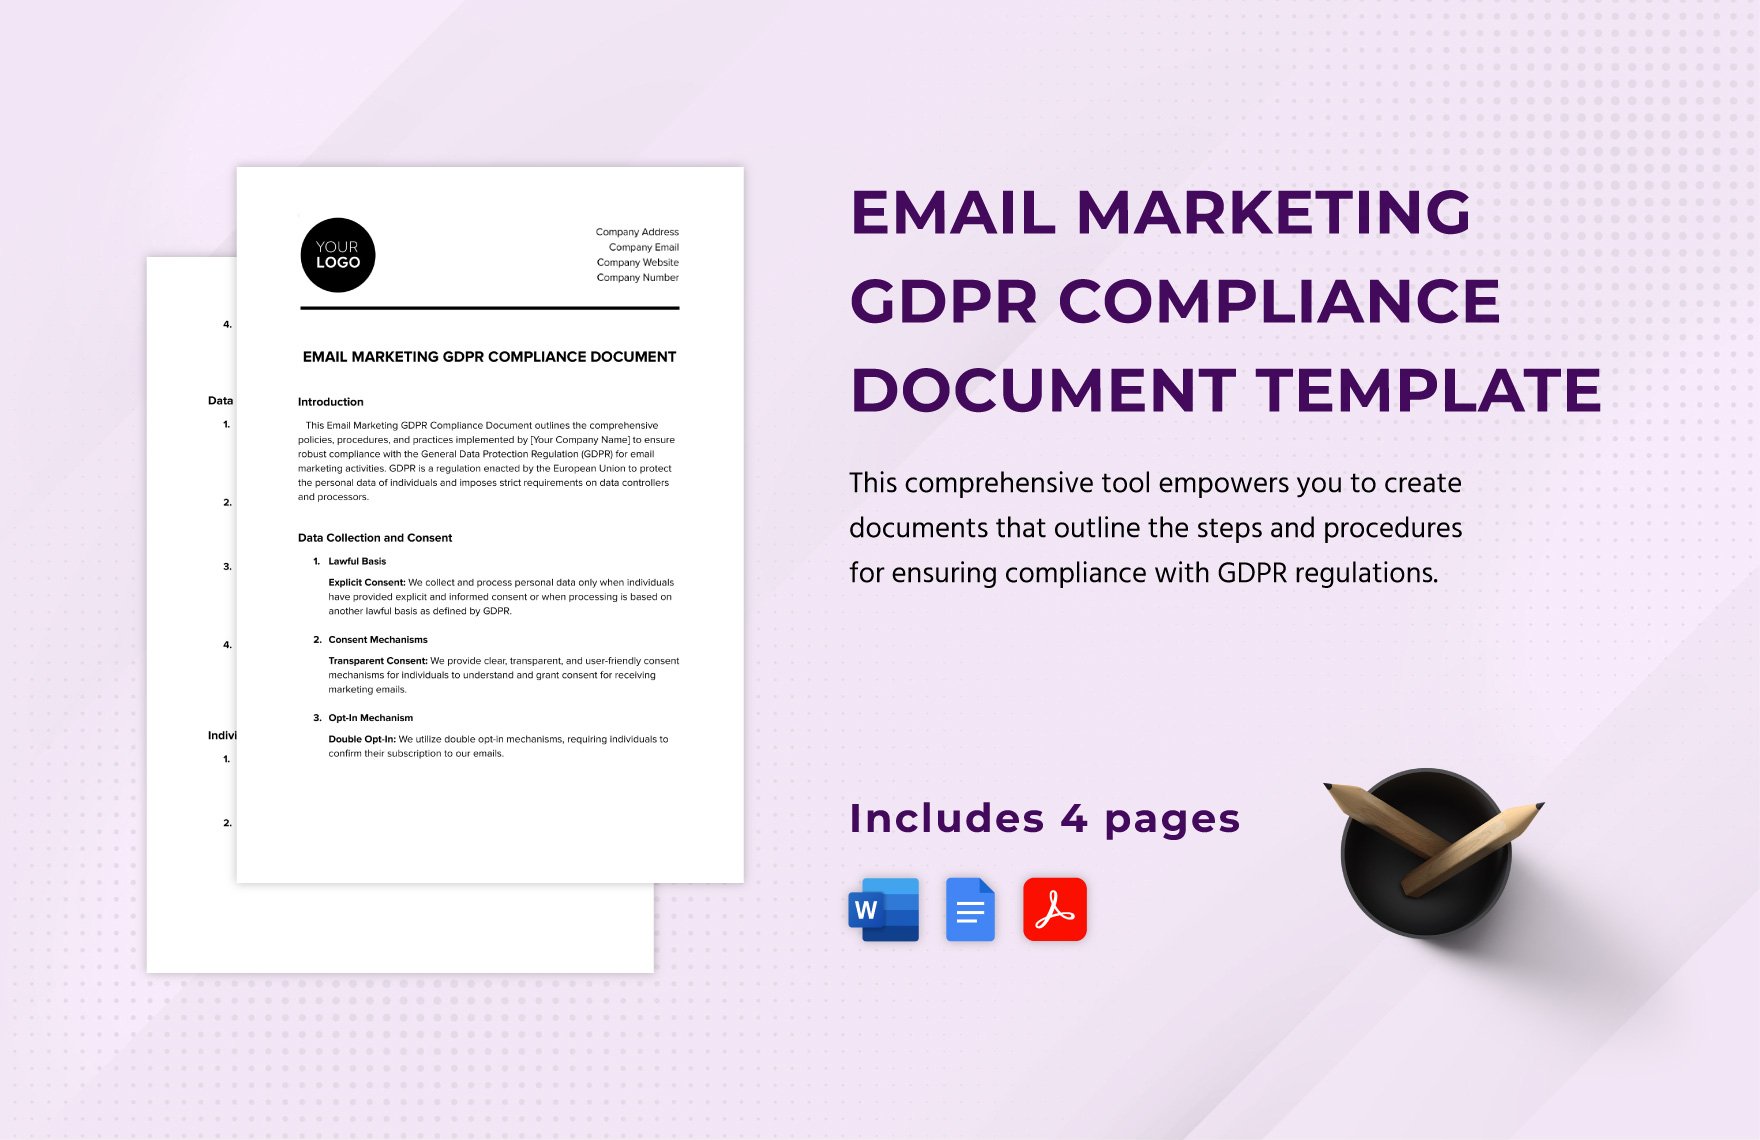 Email Marketing GDPR Compliance Document Template